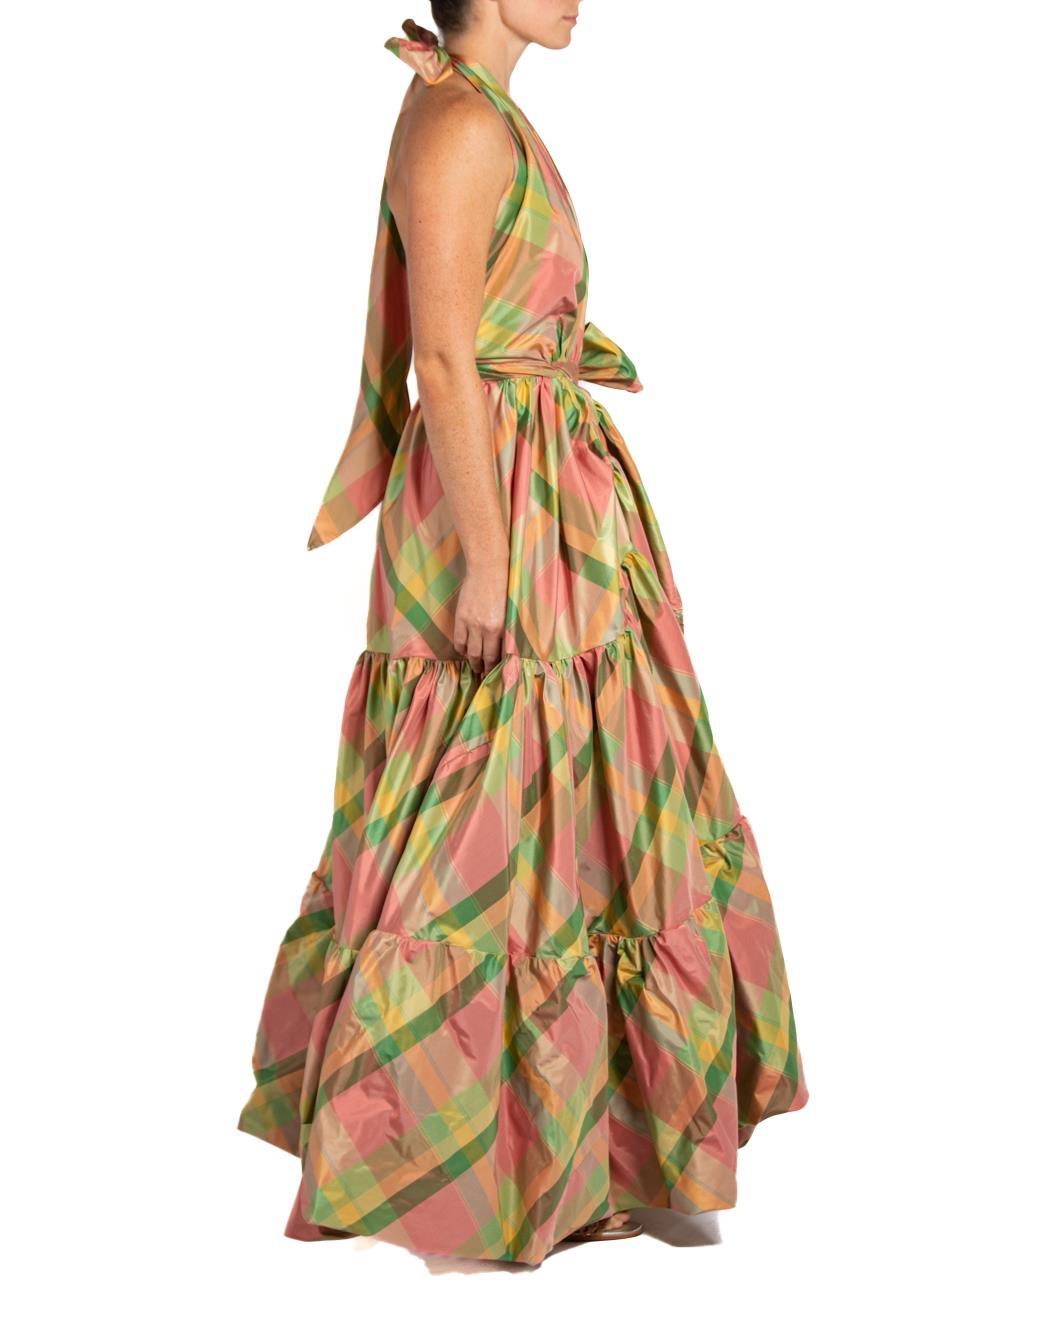 MORPHEW COLLECTION Pink & Green Silk Taffeta Plaid Gown In Excellent Condition For Sale In New York, NY